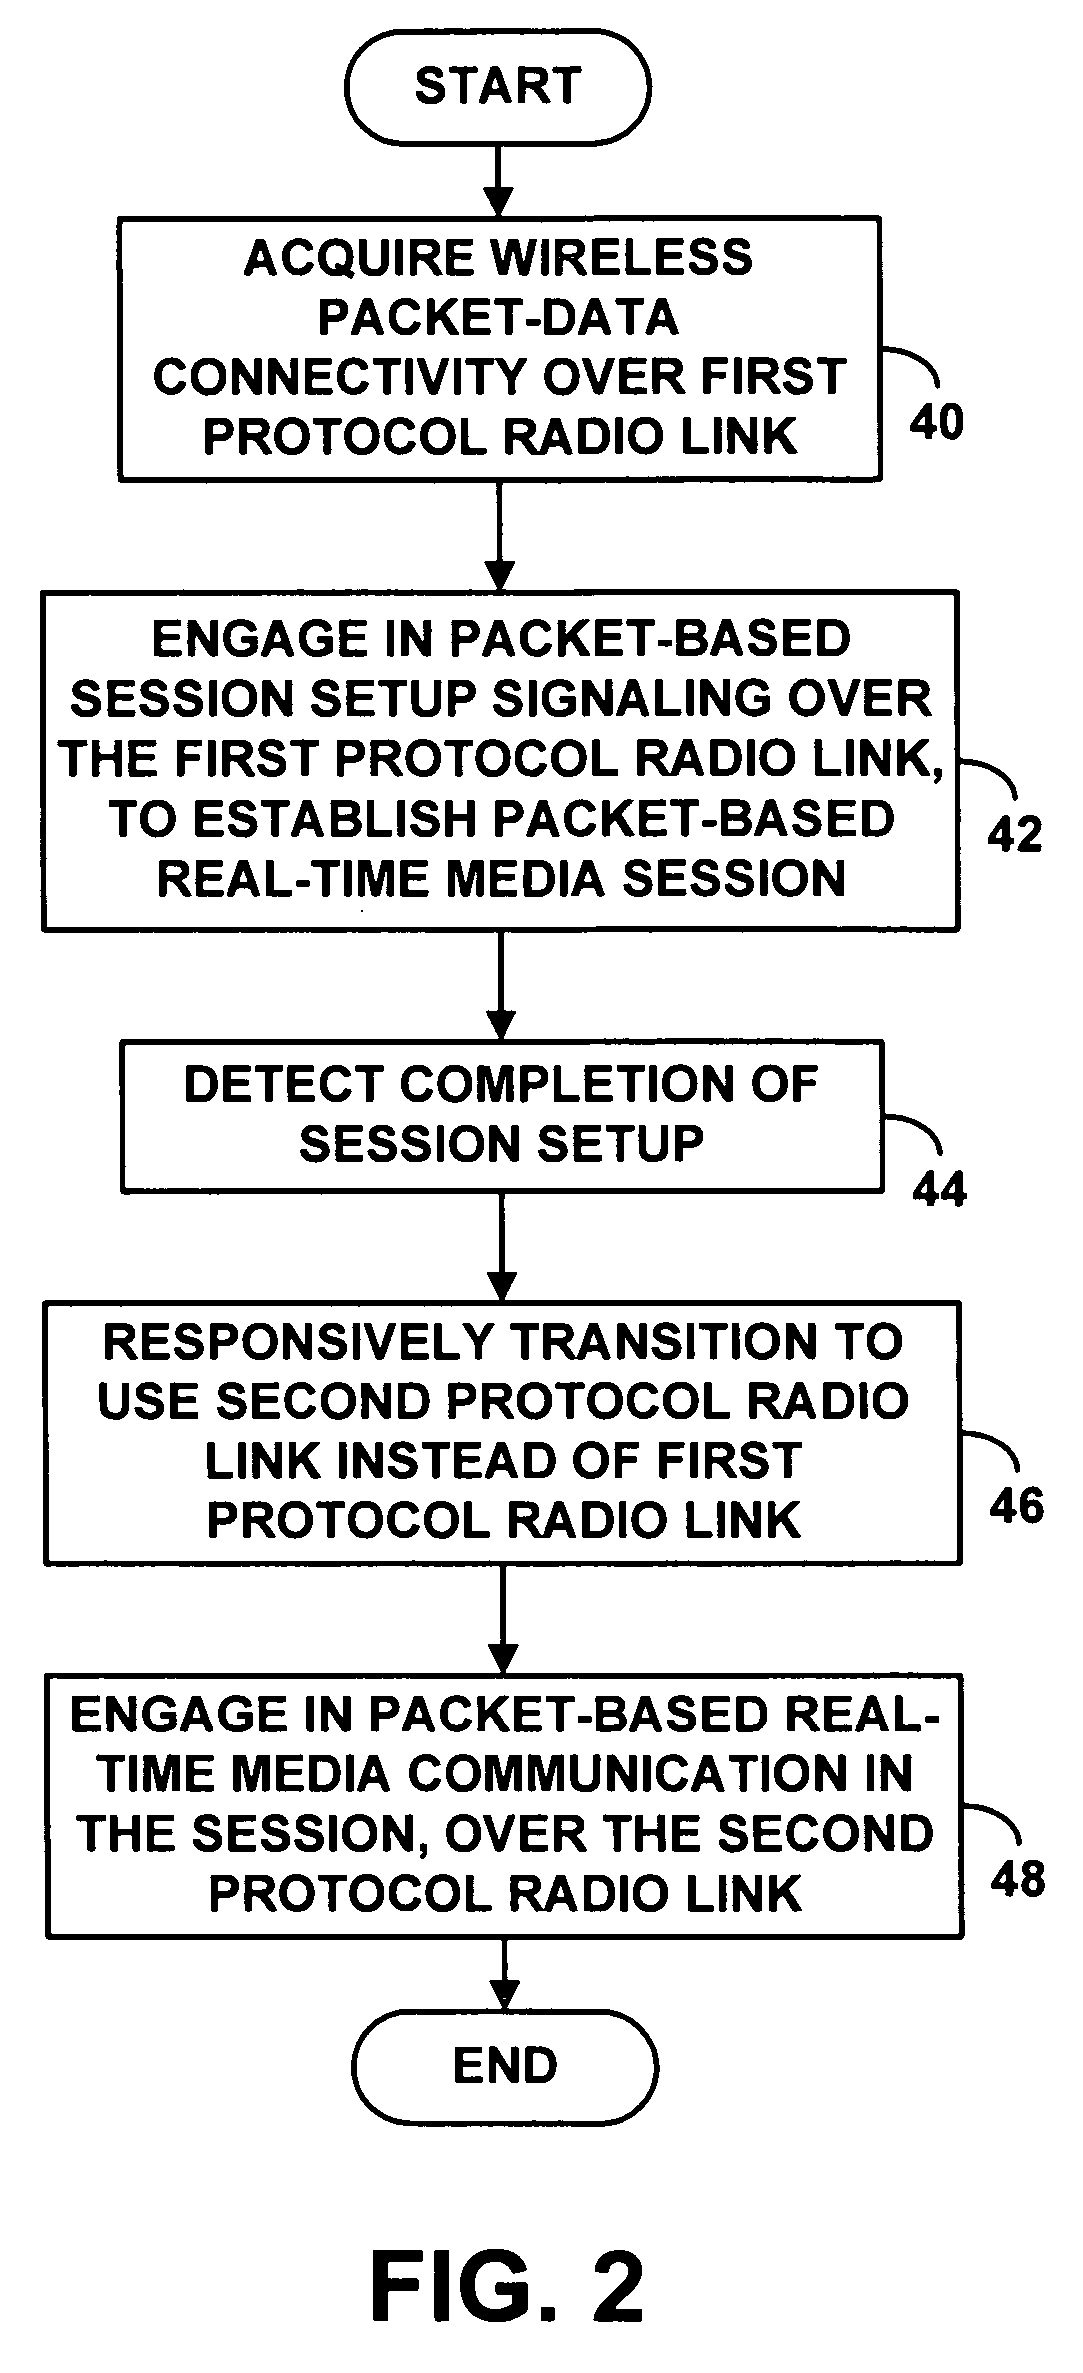 Method and apparatus for transitioning between radio link protocols in a packet-based real-time media communication system